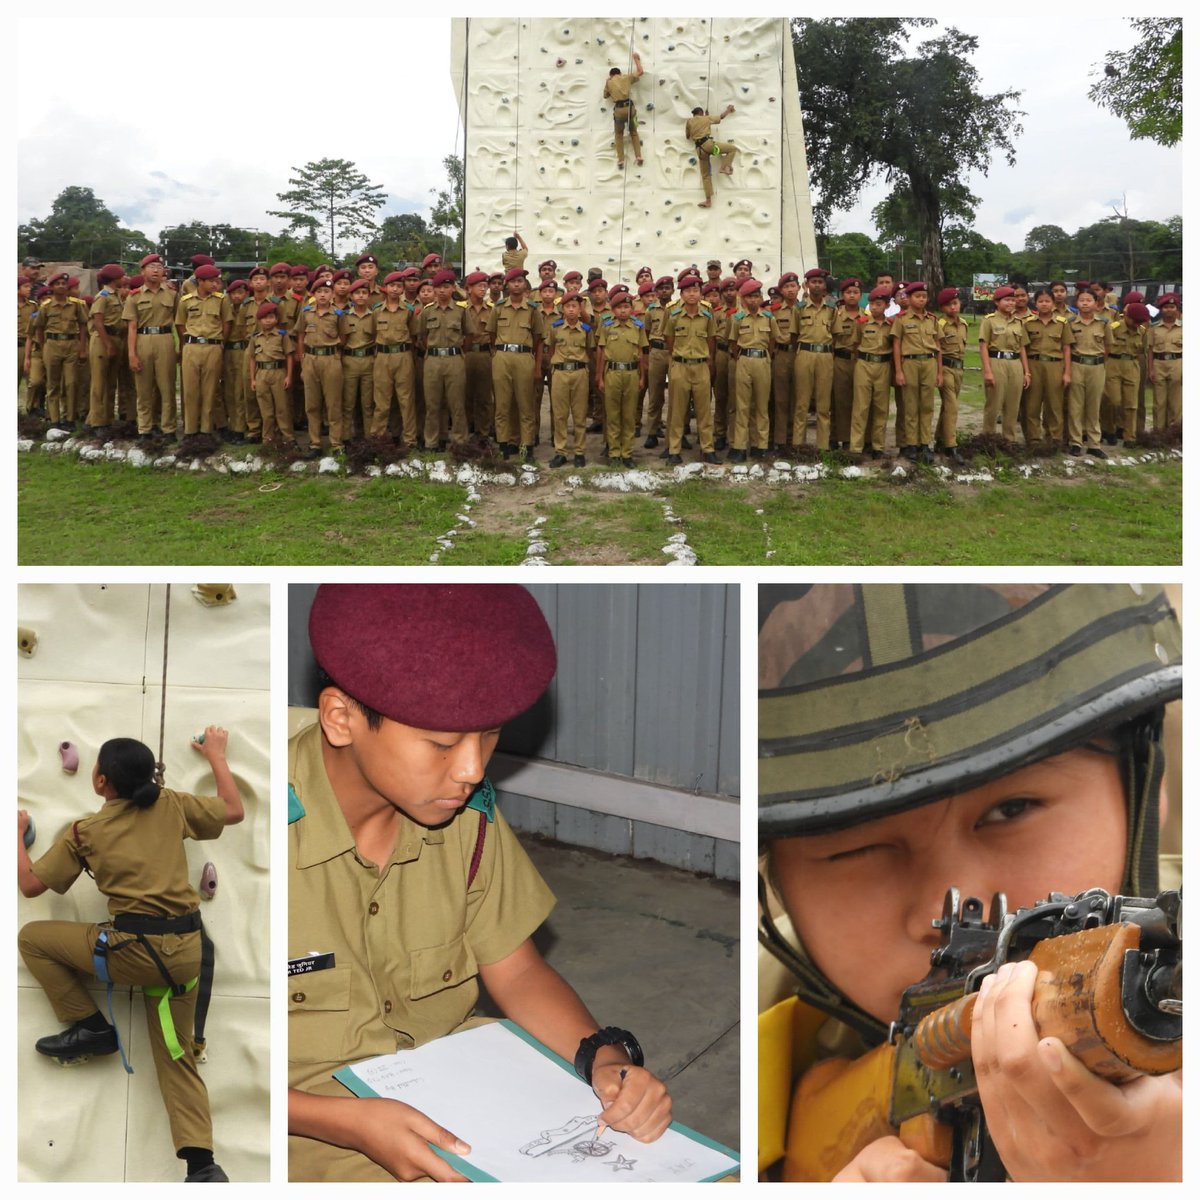 80 boys & 13 girl #Cadets of Sainik School, Niglok, #ArunachalPradesh spent 𝗔 𝗗𝗮𝘆 𝘄𝗶𝘁𝗵 𝗦𝗼𝗹𝗱𝗶𝗲𝗿𝘀 𝗼𝗳 #𝗦𝗽𝗲𝗮𝗿𝗖𝗼𝗿𝗽𝘀 at Sigar Military Station. During the visit, students gained first hand experience of small arms firing, rock climbing, travelling in…